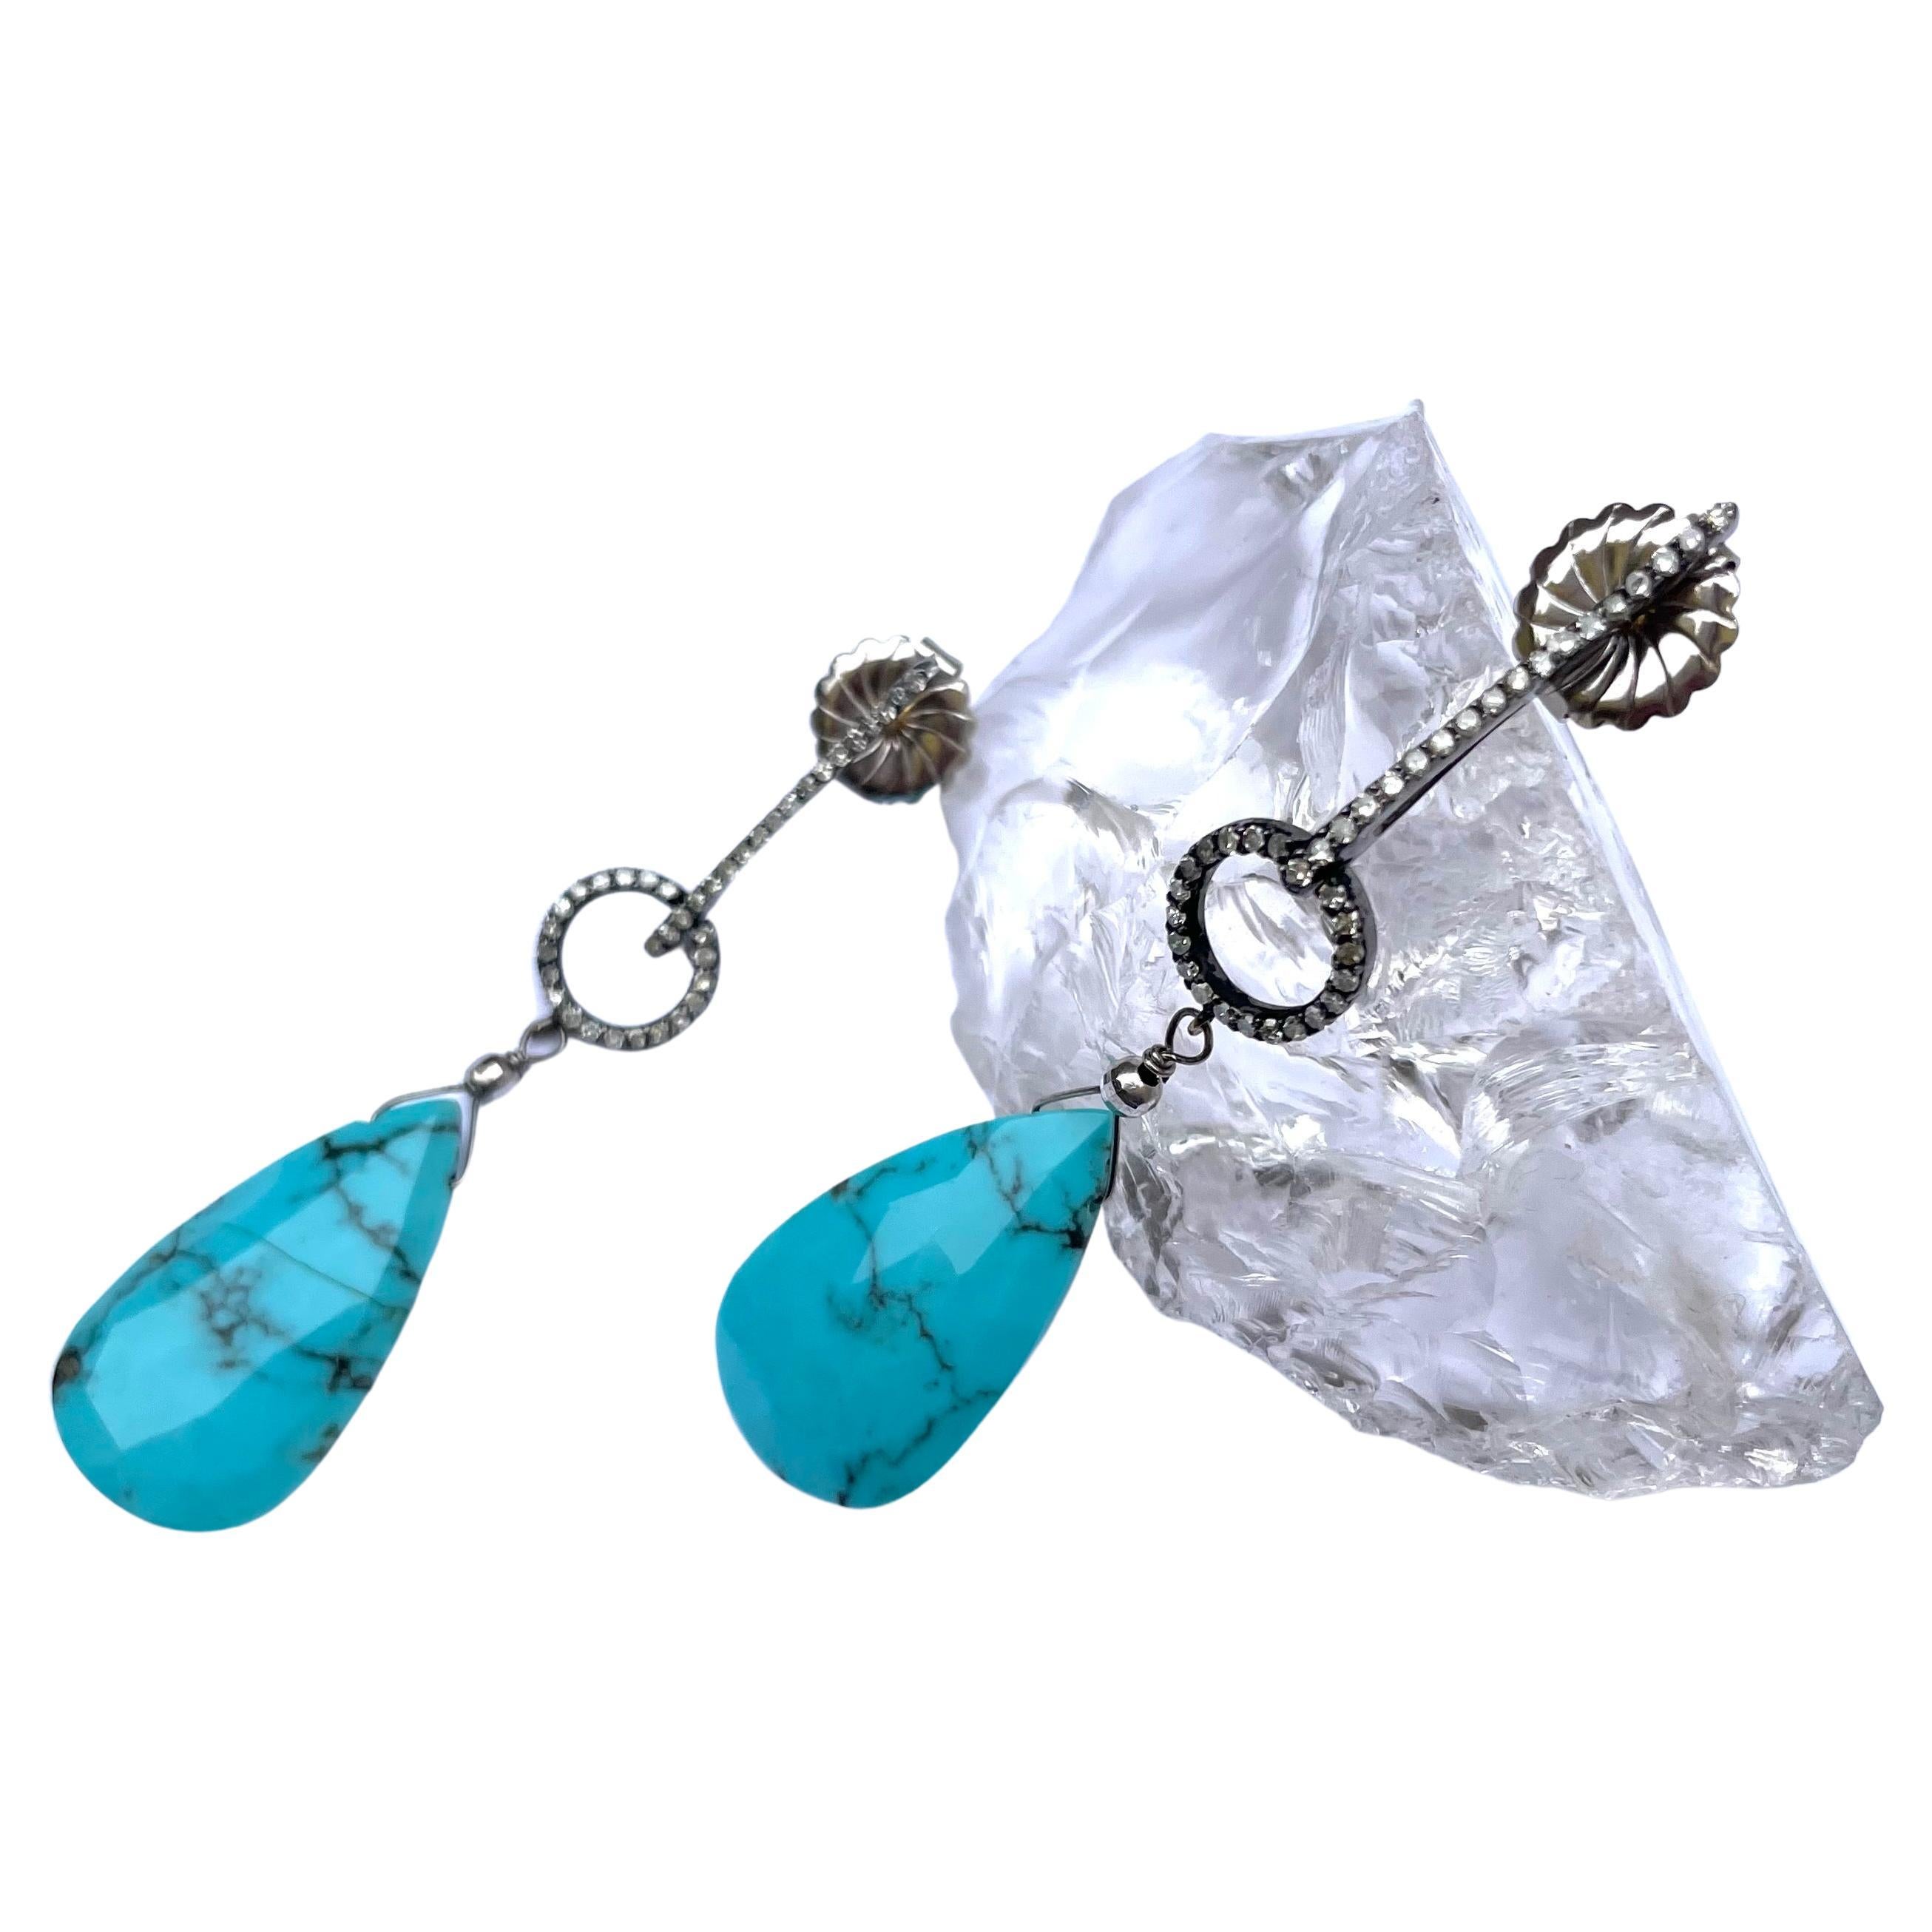 Description
Exquisite Sleeping Beauty turquoise earrings with pave diamonds
Item #E3058

Materials and Weight
Sleeping Beauty turquoise with matrix 26 carats, 16x28mm, pear shape
Pave diamonds
Faceted balls, 3mm, 14k white gold
Posts and jumbo